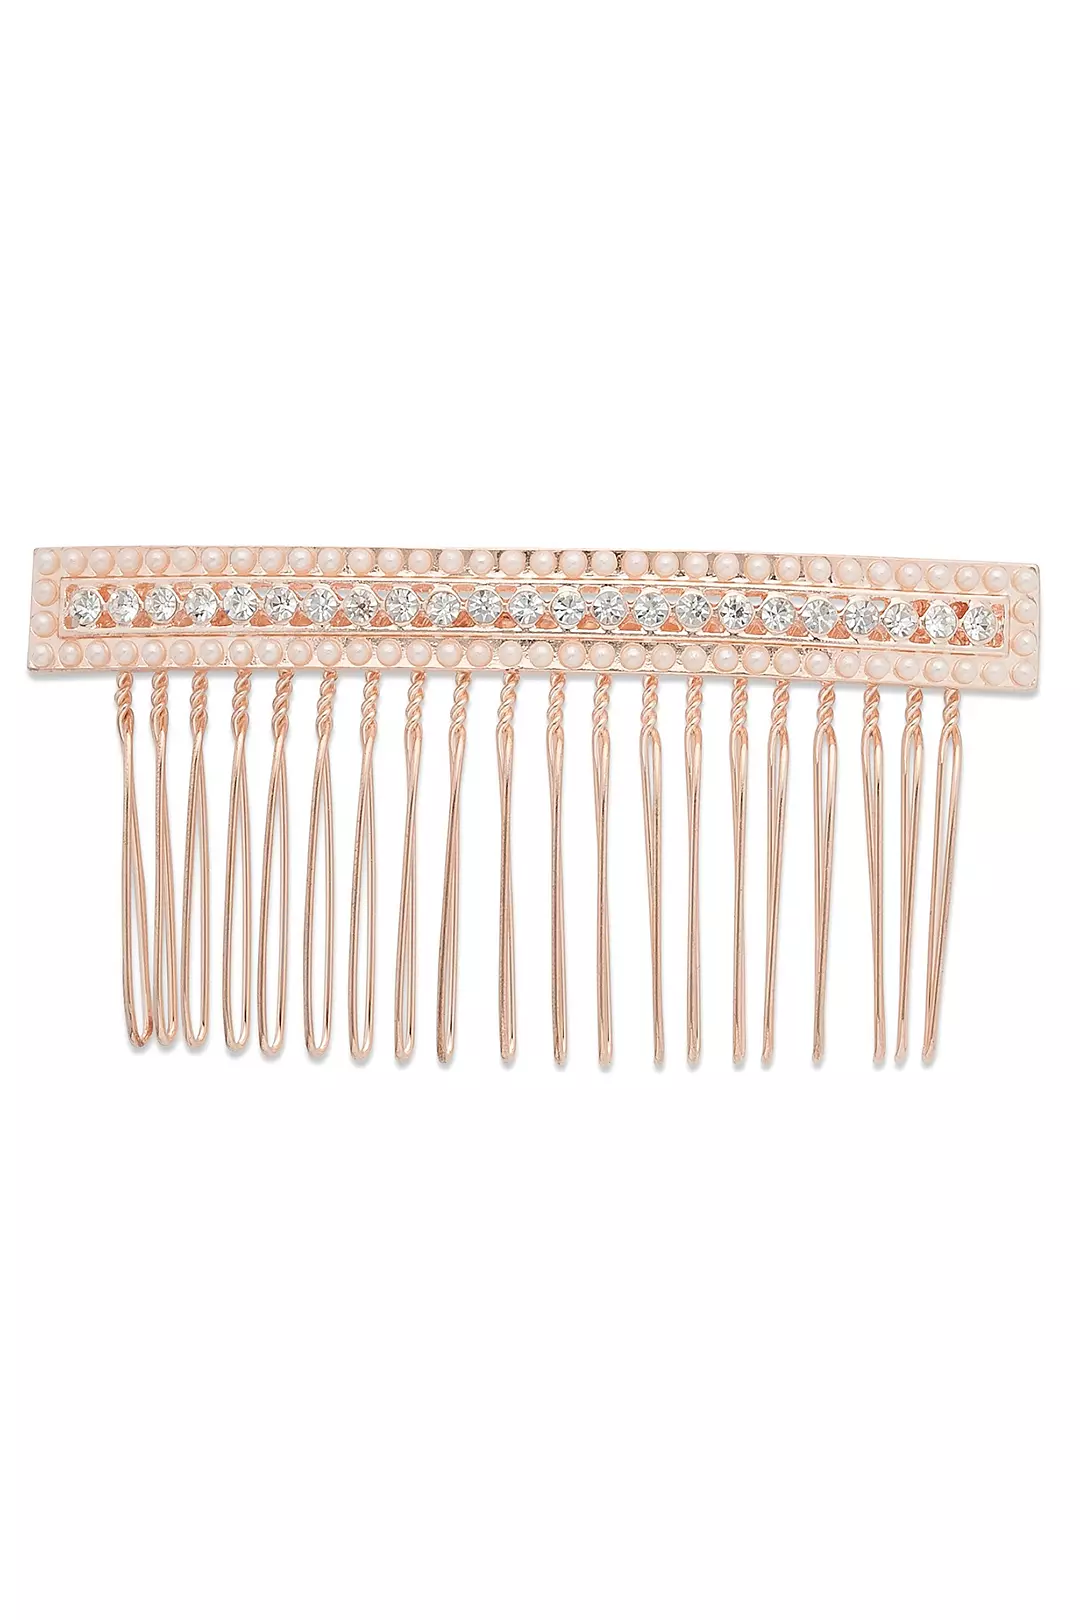 Linear Crystal and Pearl Hair Comb Image